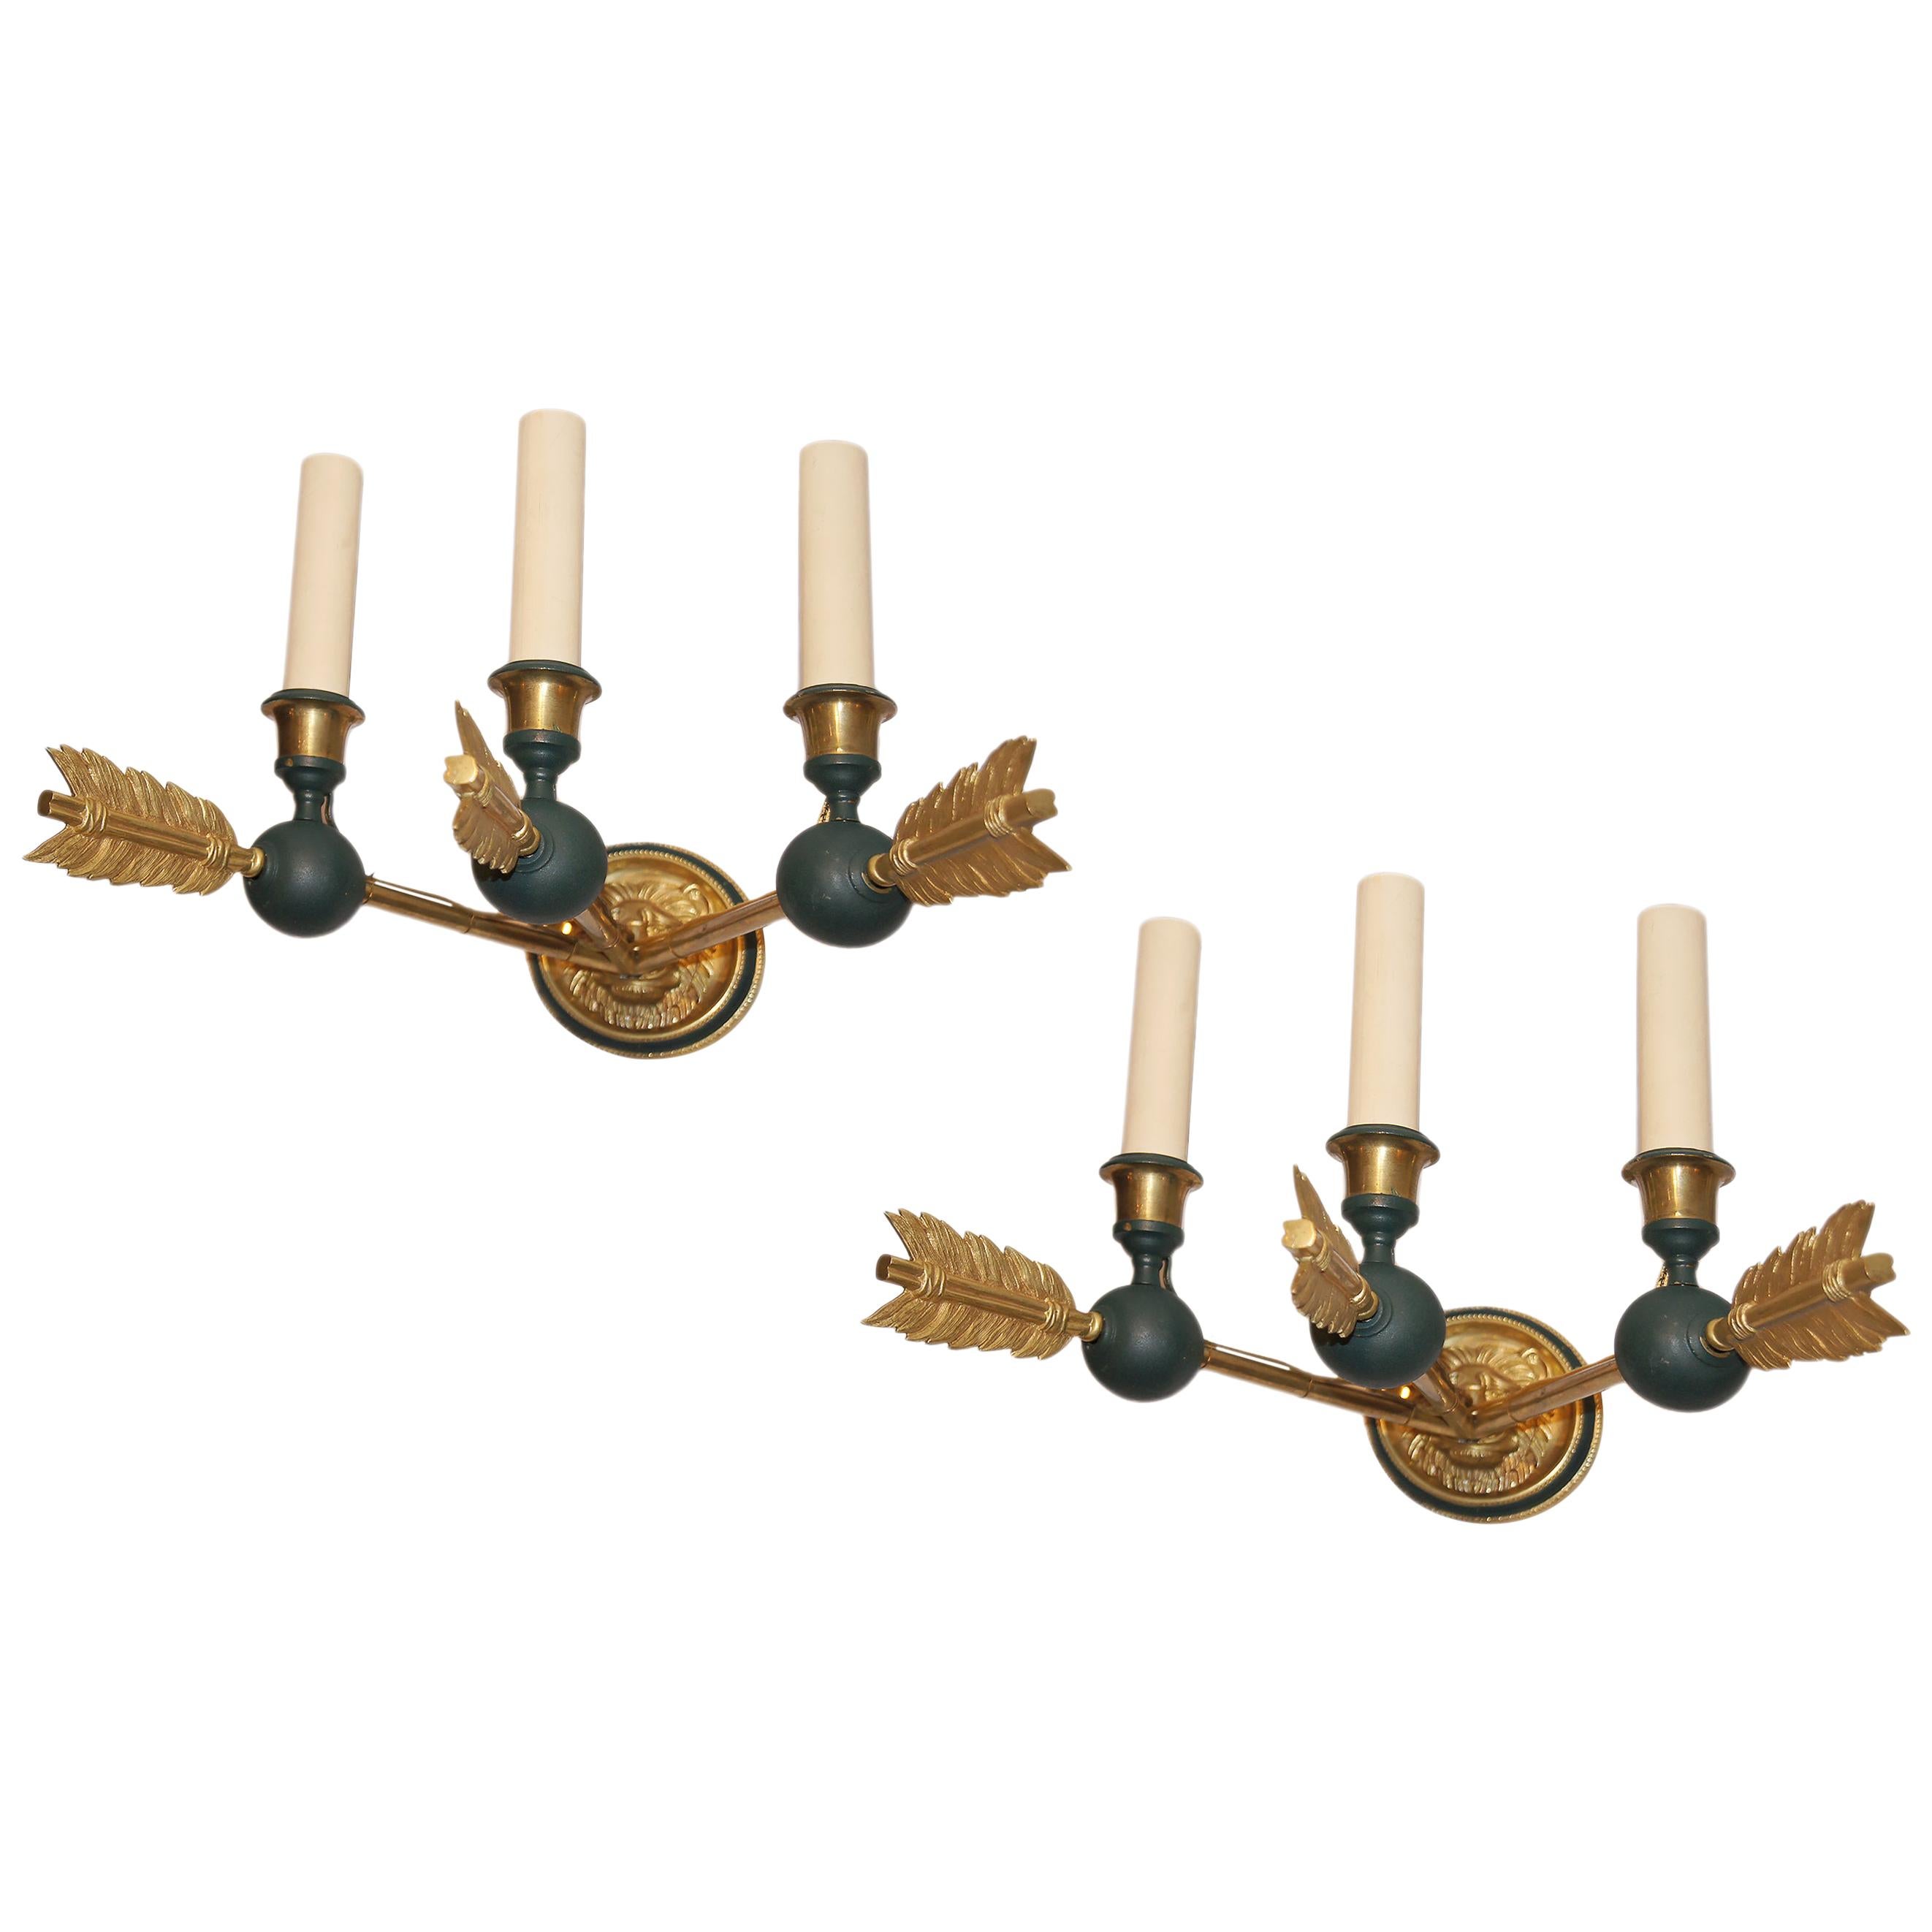 Pair of Empire Style Sconces with Lion Motif